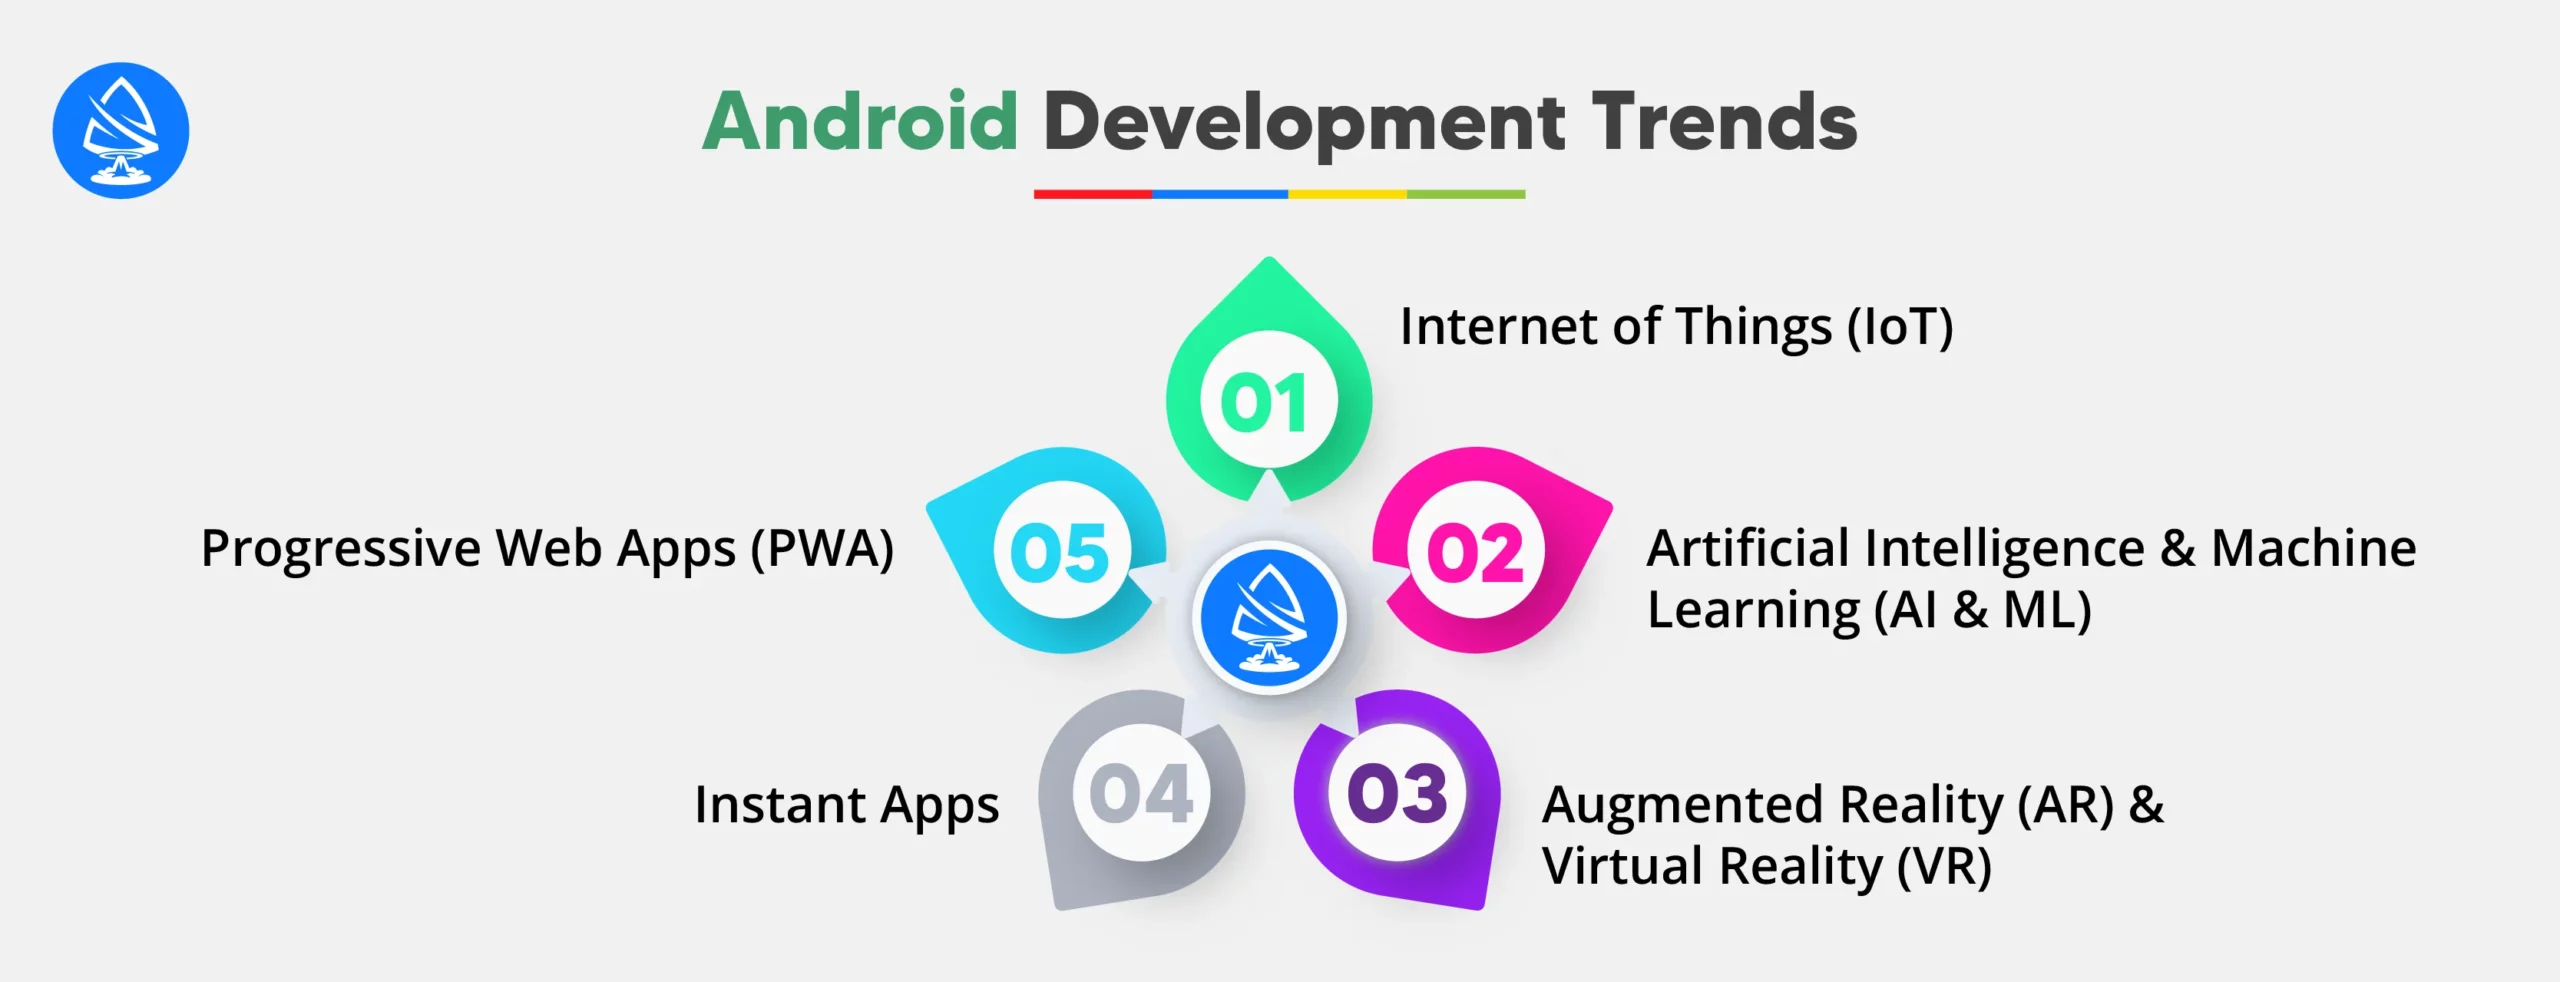 Current Android Development Trends